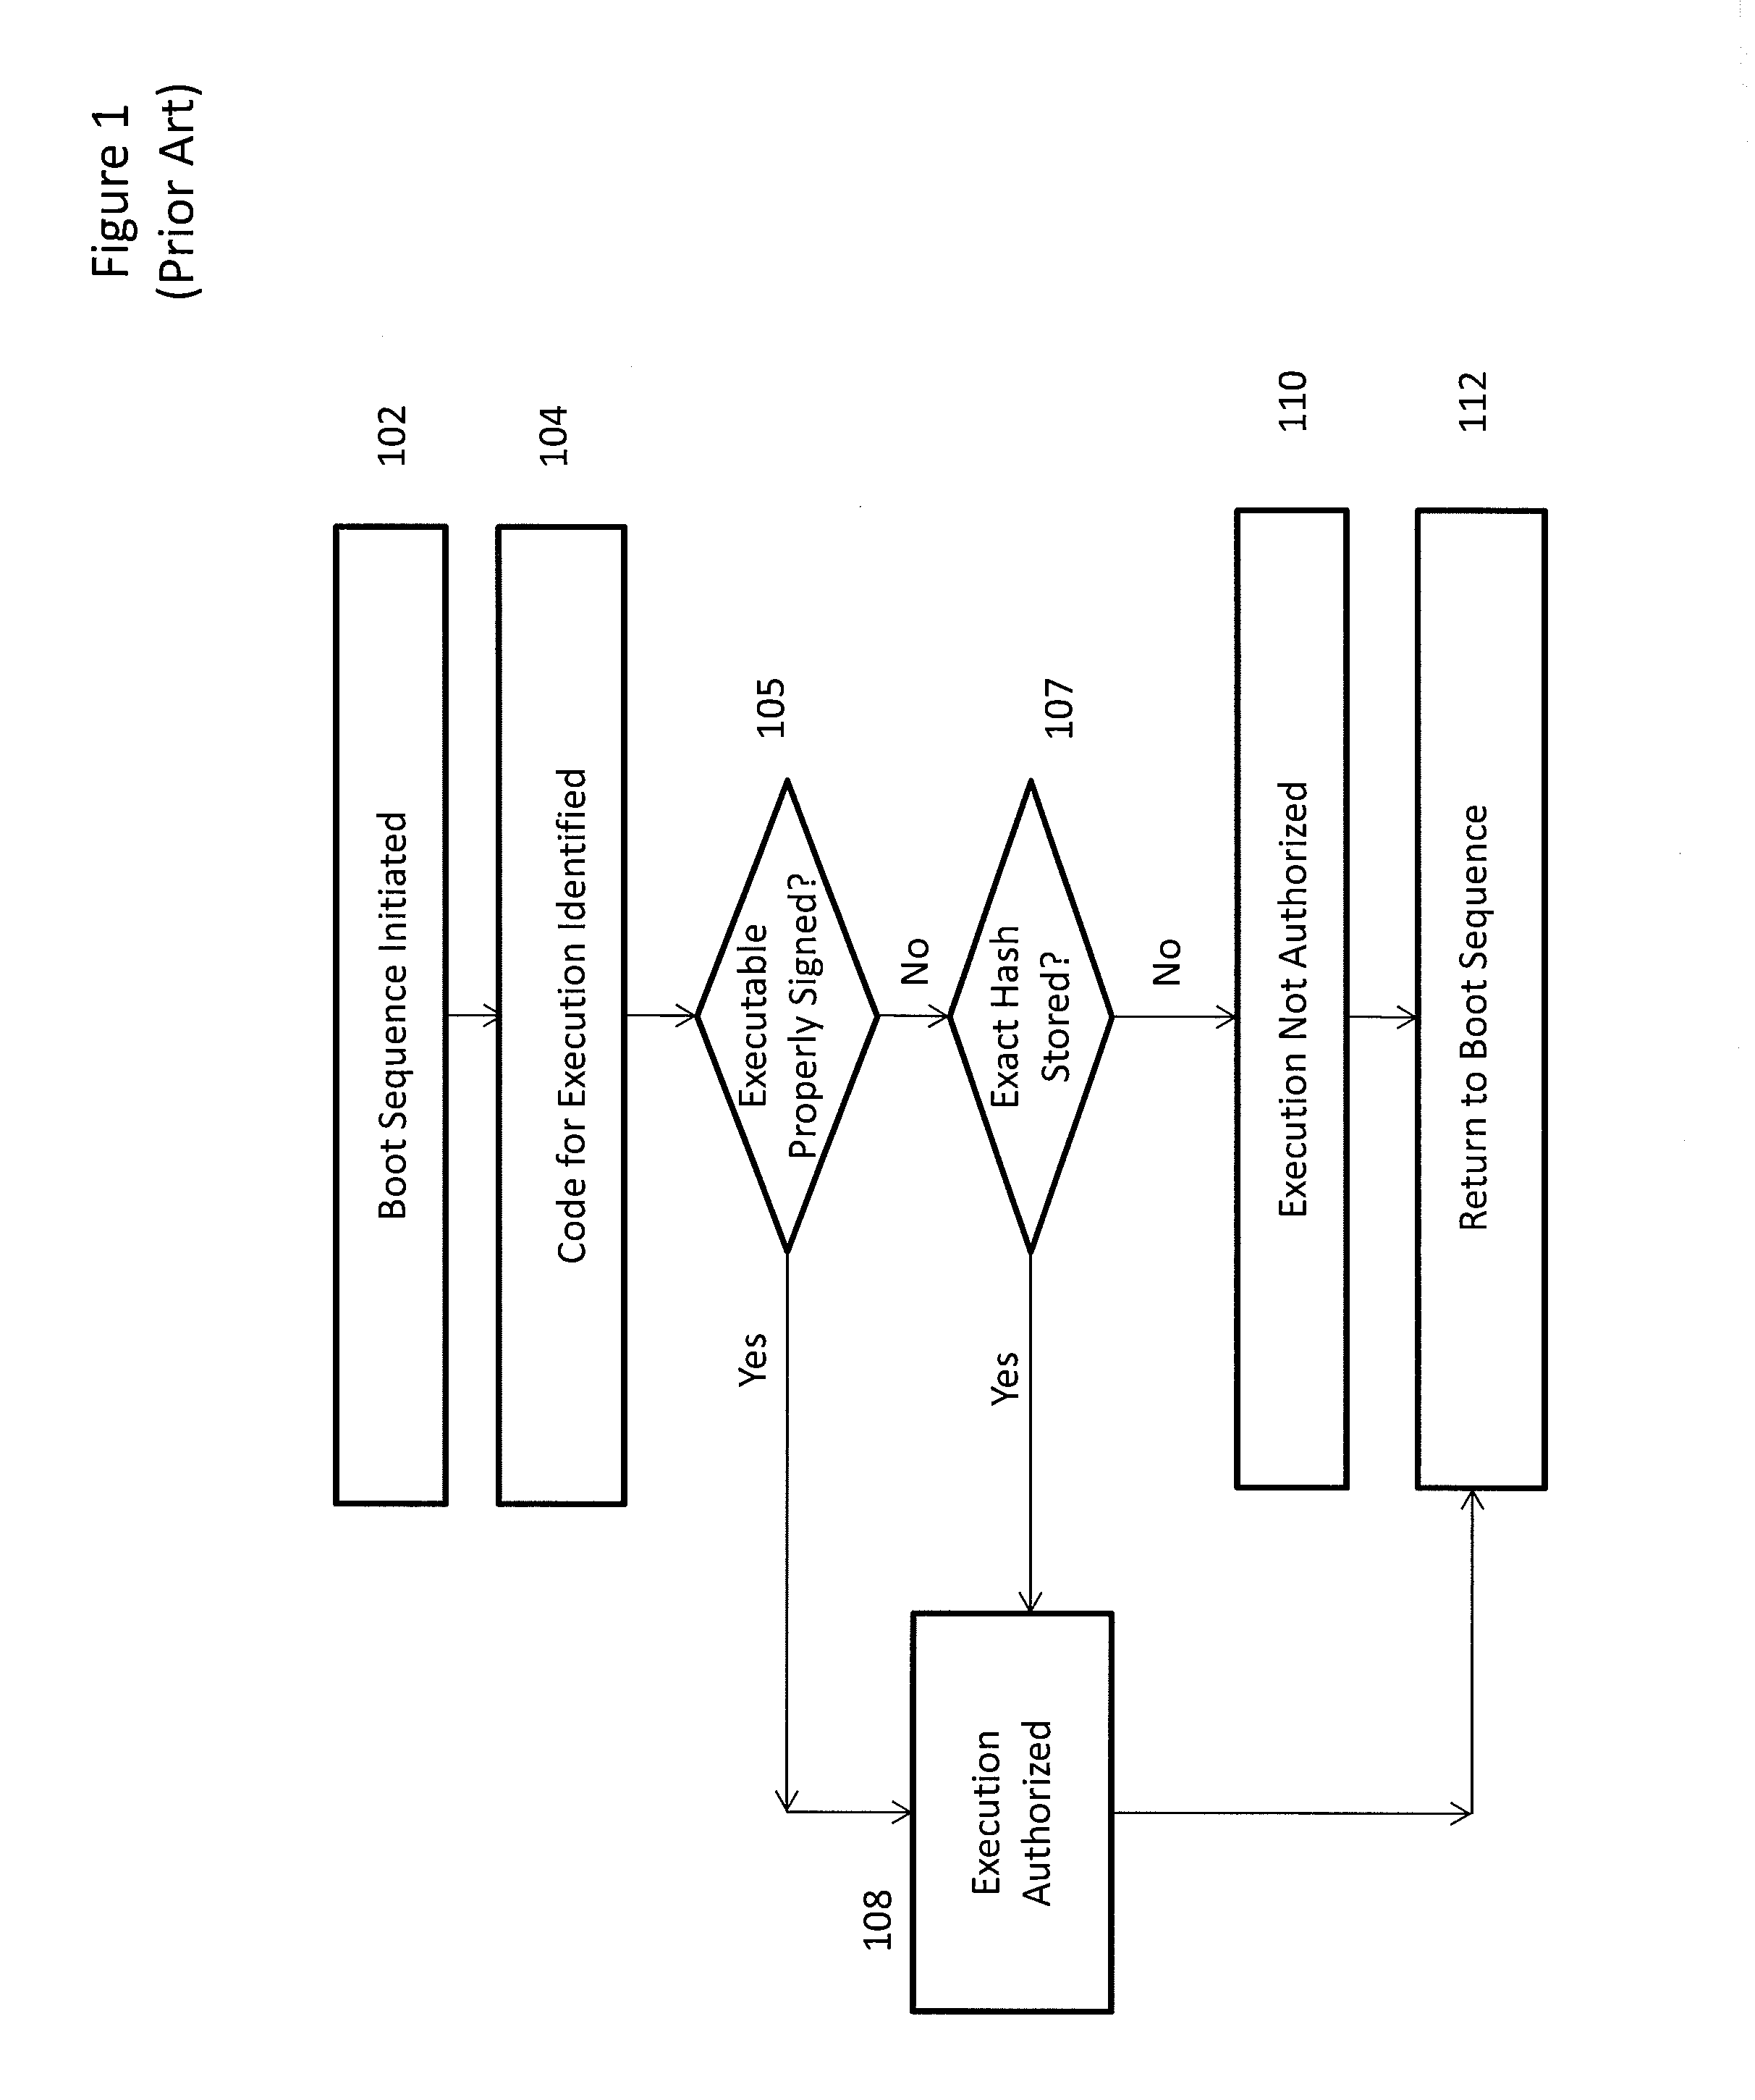 Secure boot administration in a unified extensible firmware interface (UEFI)-compliant computing device